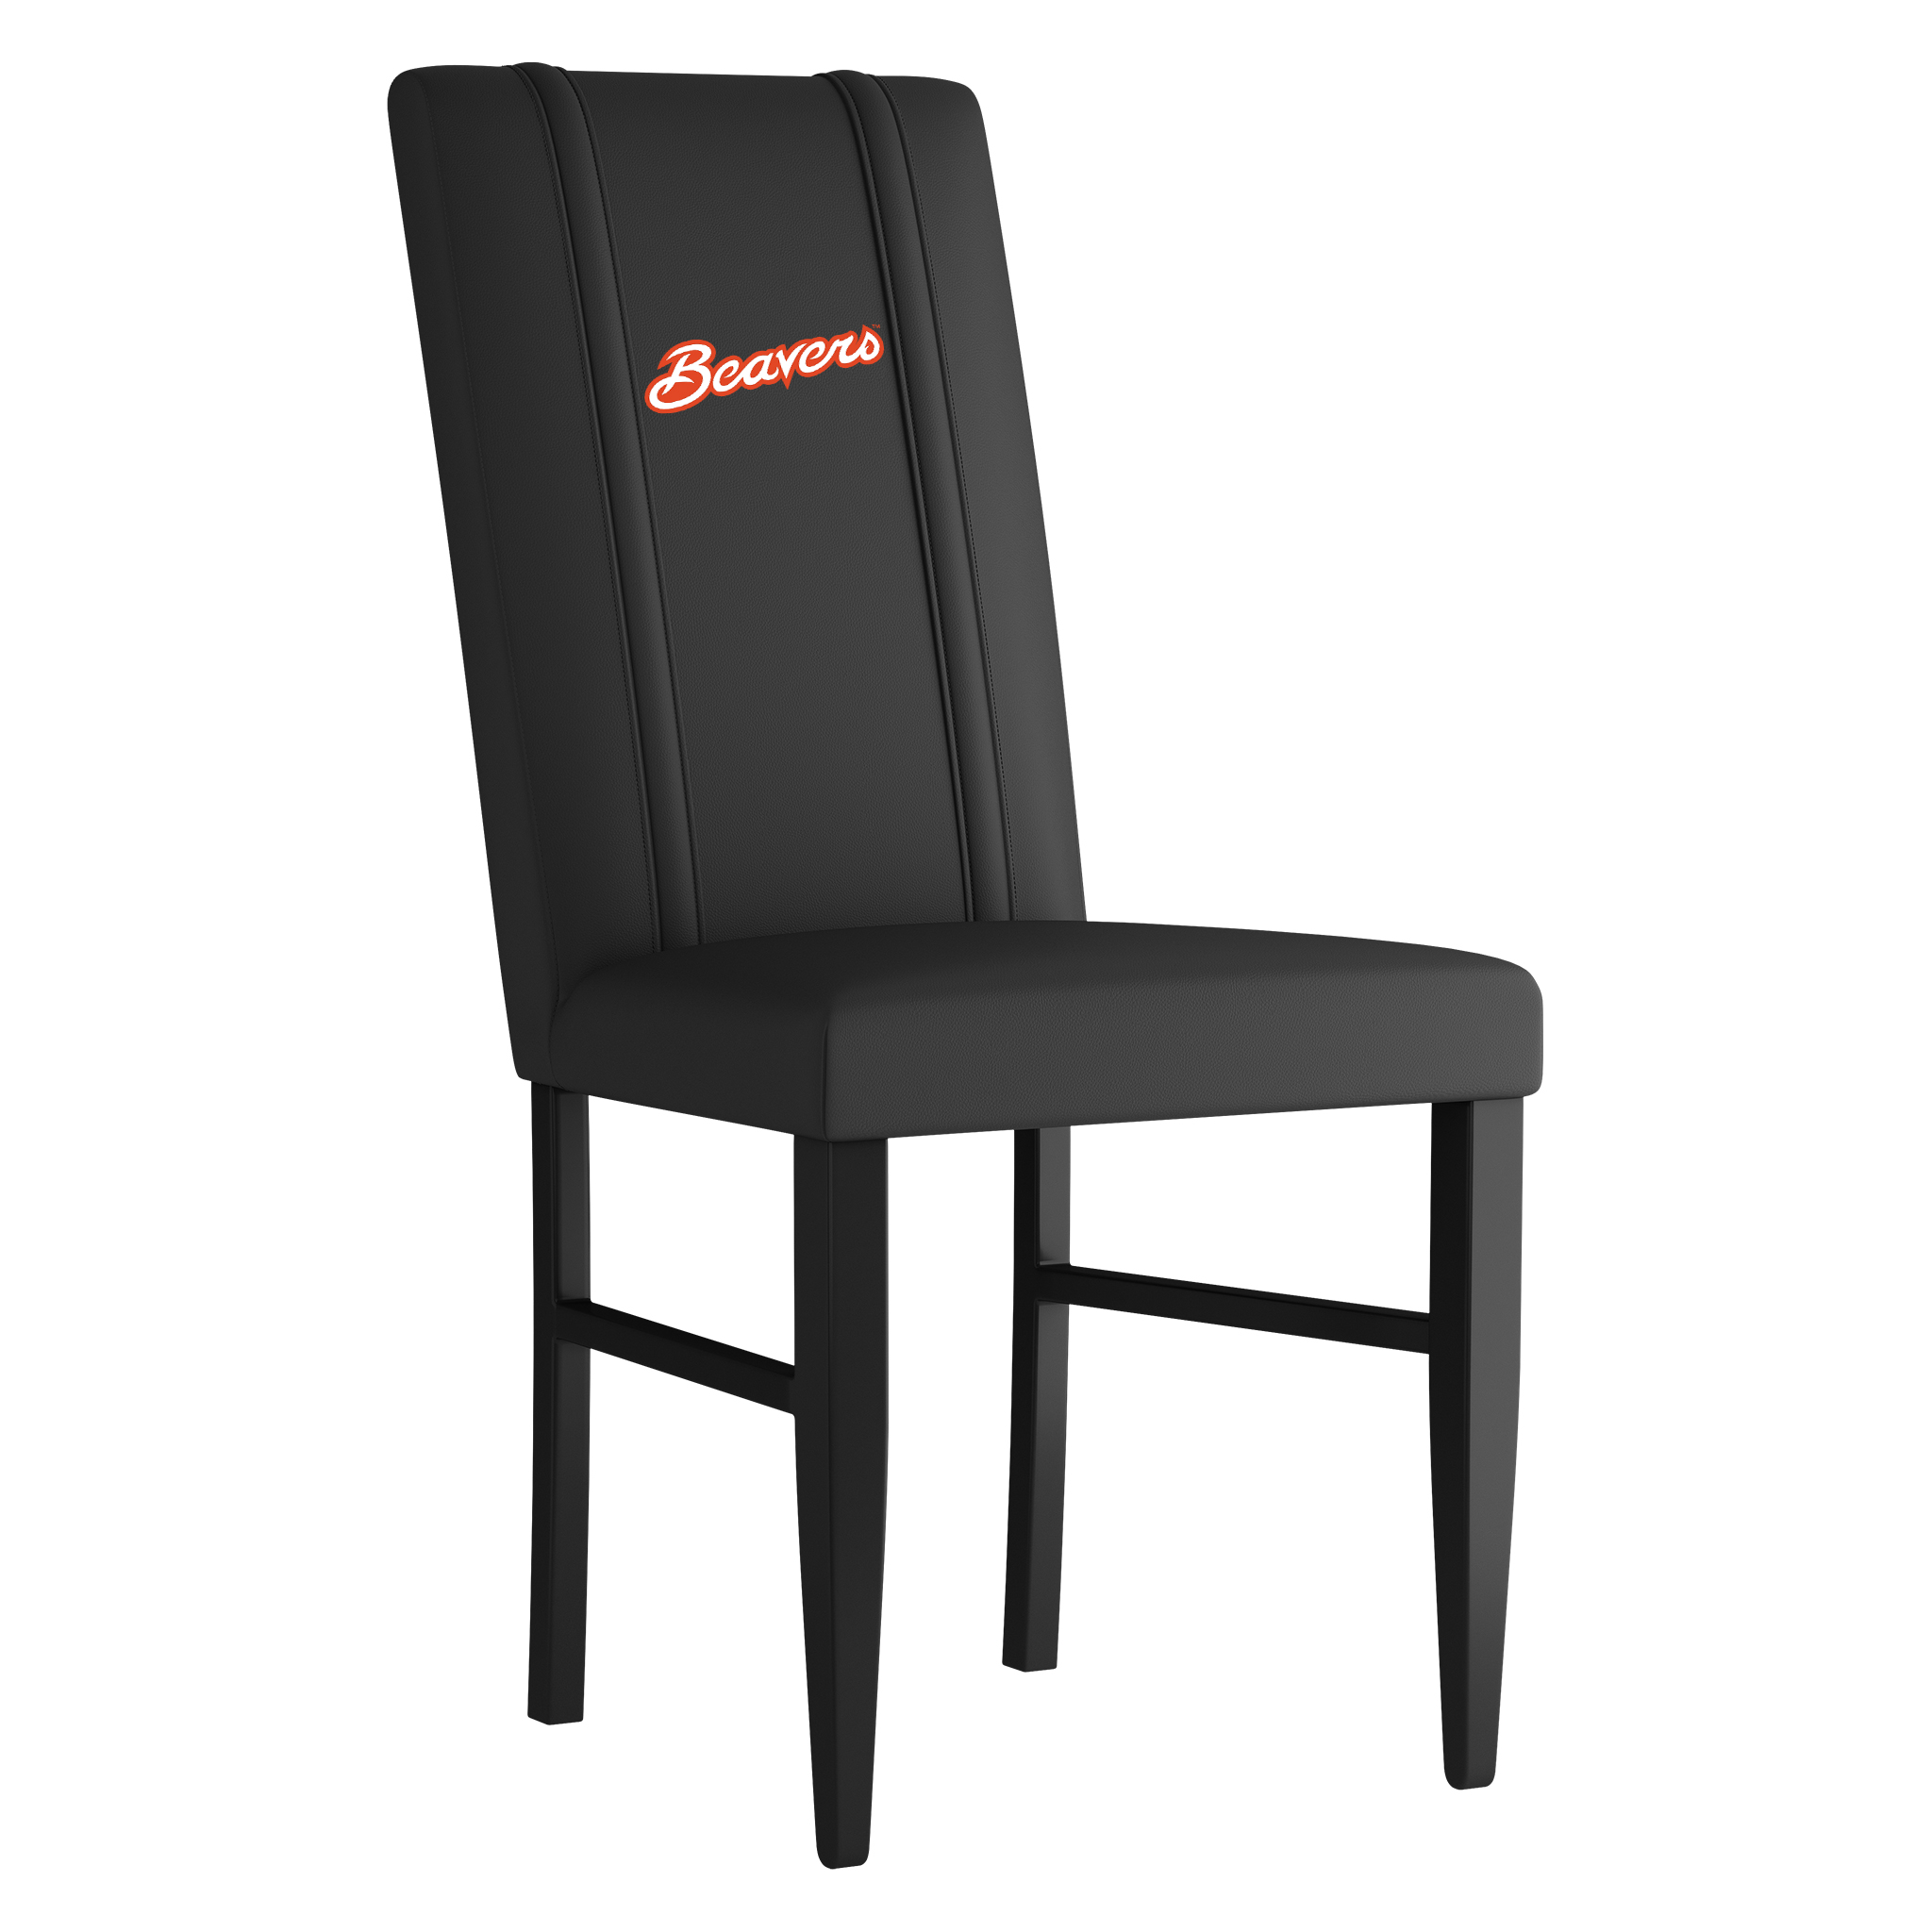 Oregon State Side Chair 2000 With Oregon State Primary Logo